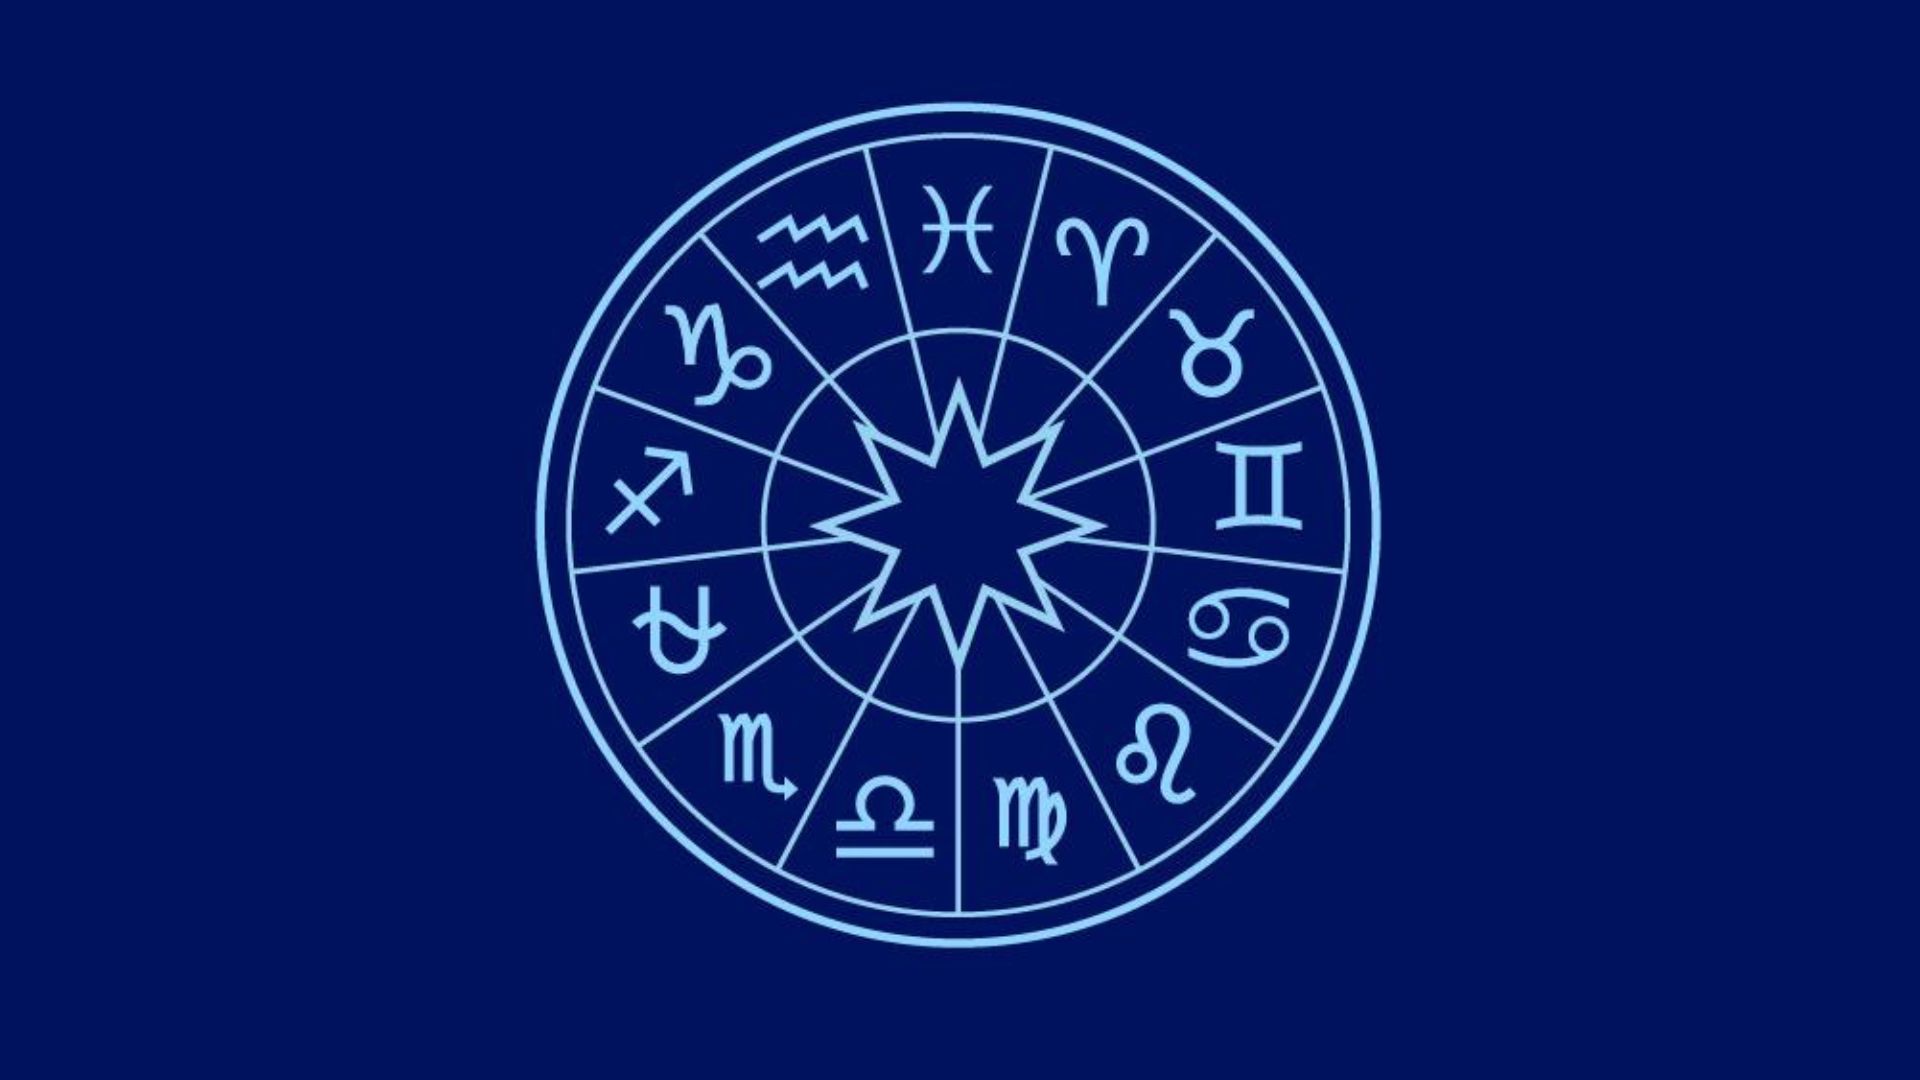 Zodiac Signs In Circle With Blue Color In Background